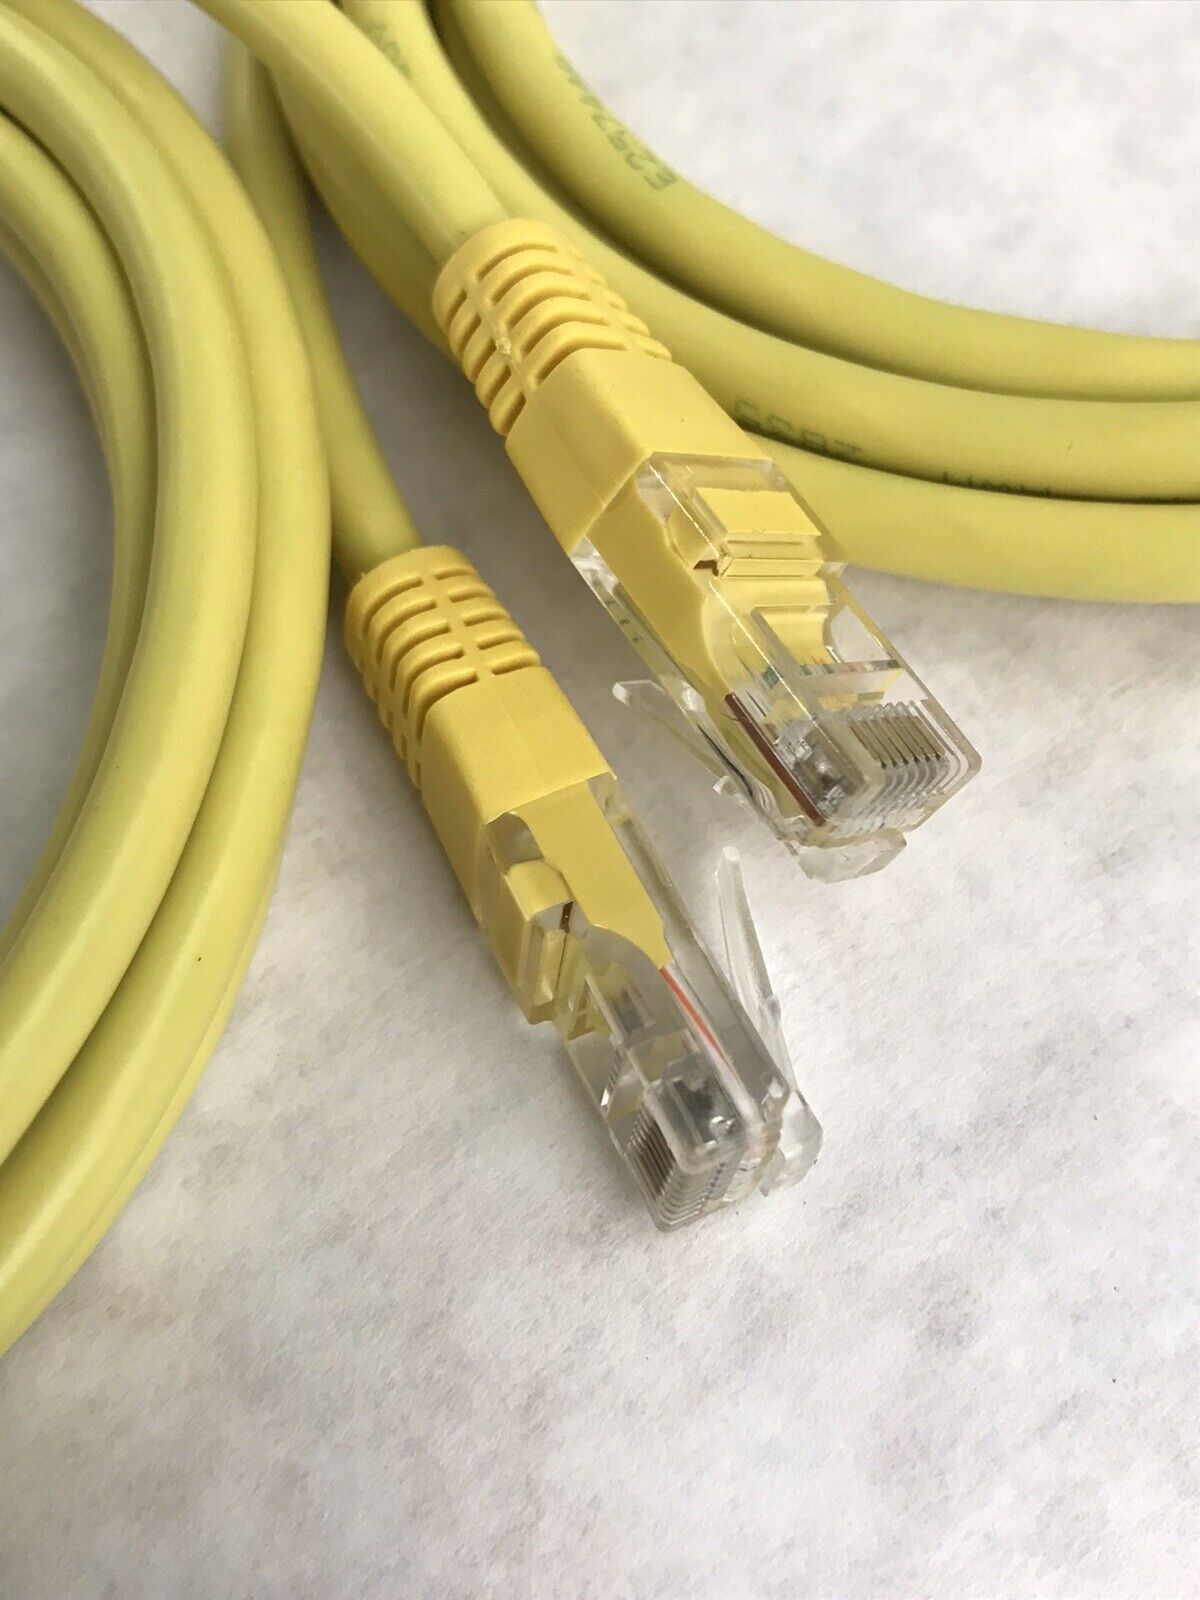 (Lot of 2) 2X Yellow CAT 5 5-Foot 24 AWG 30V Richland Networking Cables